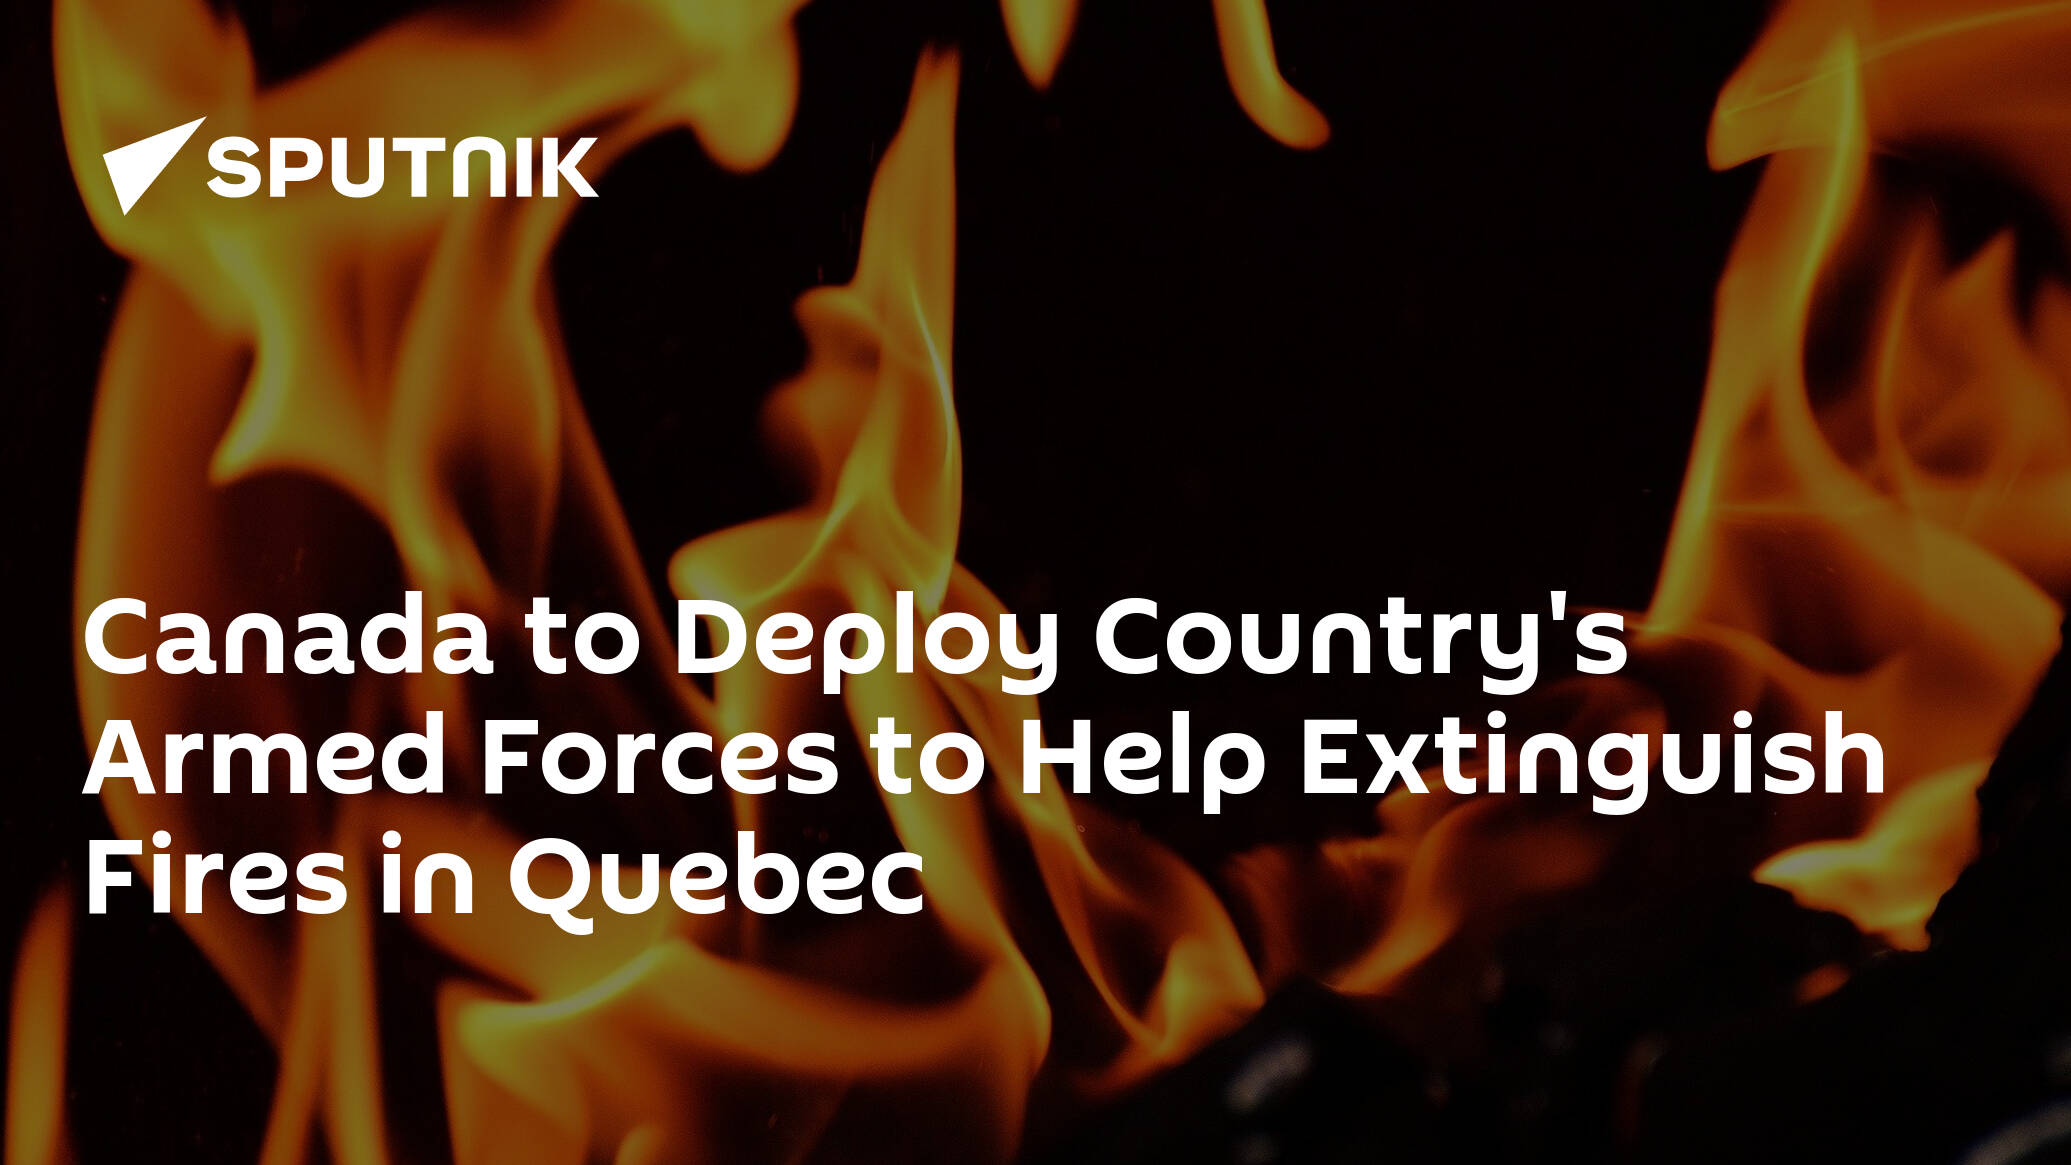 Canada to Deploy Country's Armed Forces to Help Extinguish Fires in Quebec